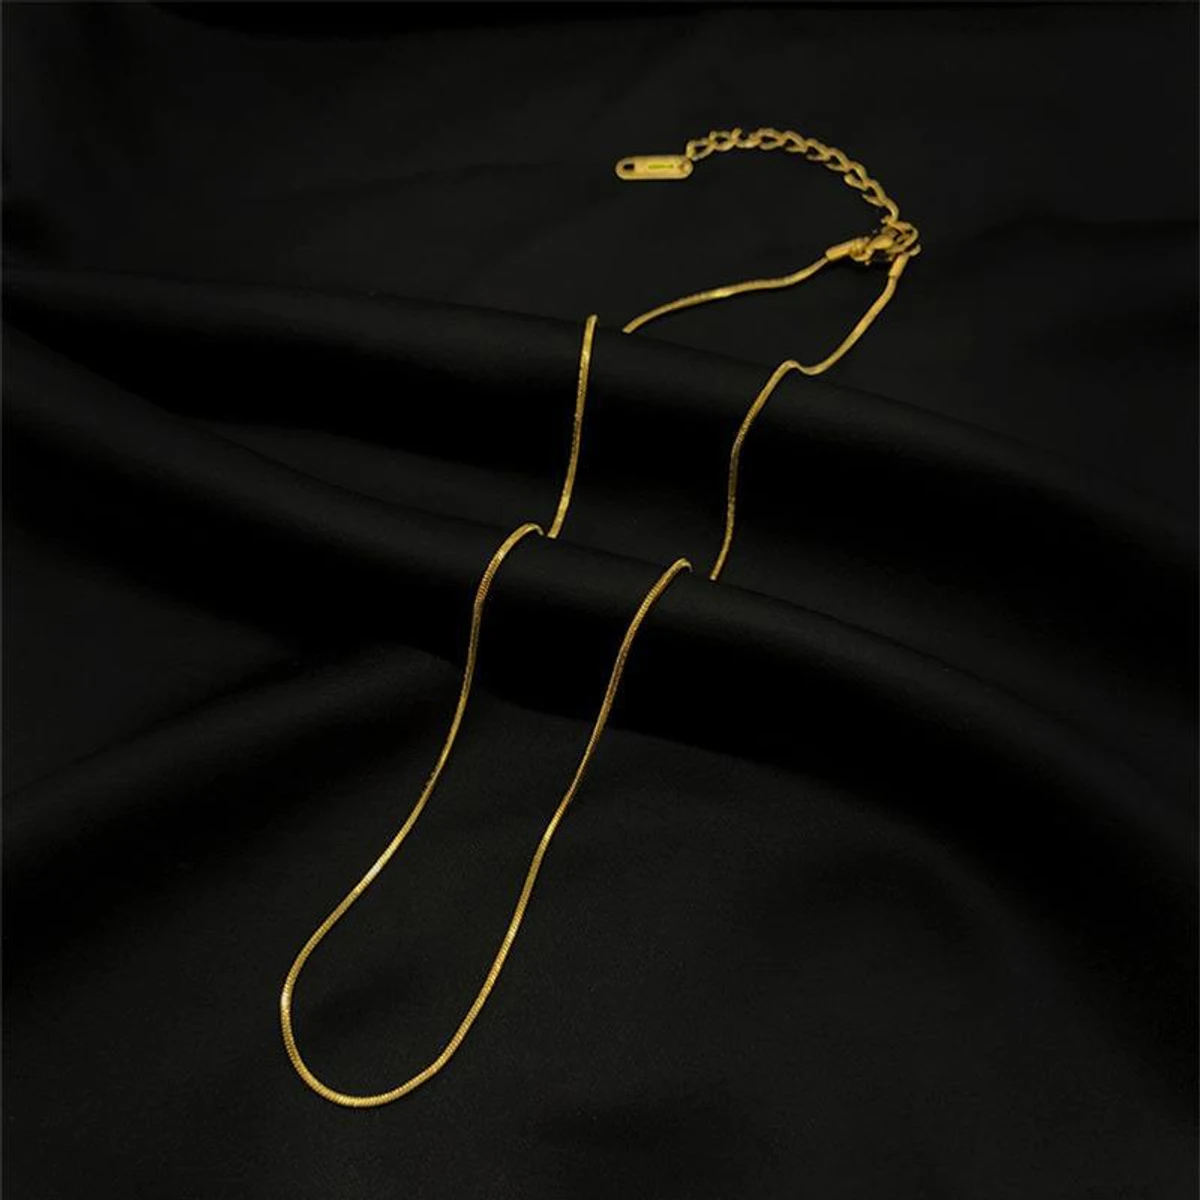 Jewellery Premium Quality Gold Colour Long Chain For Women- Chain For Girls